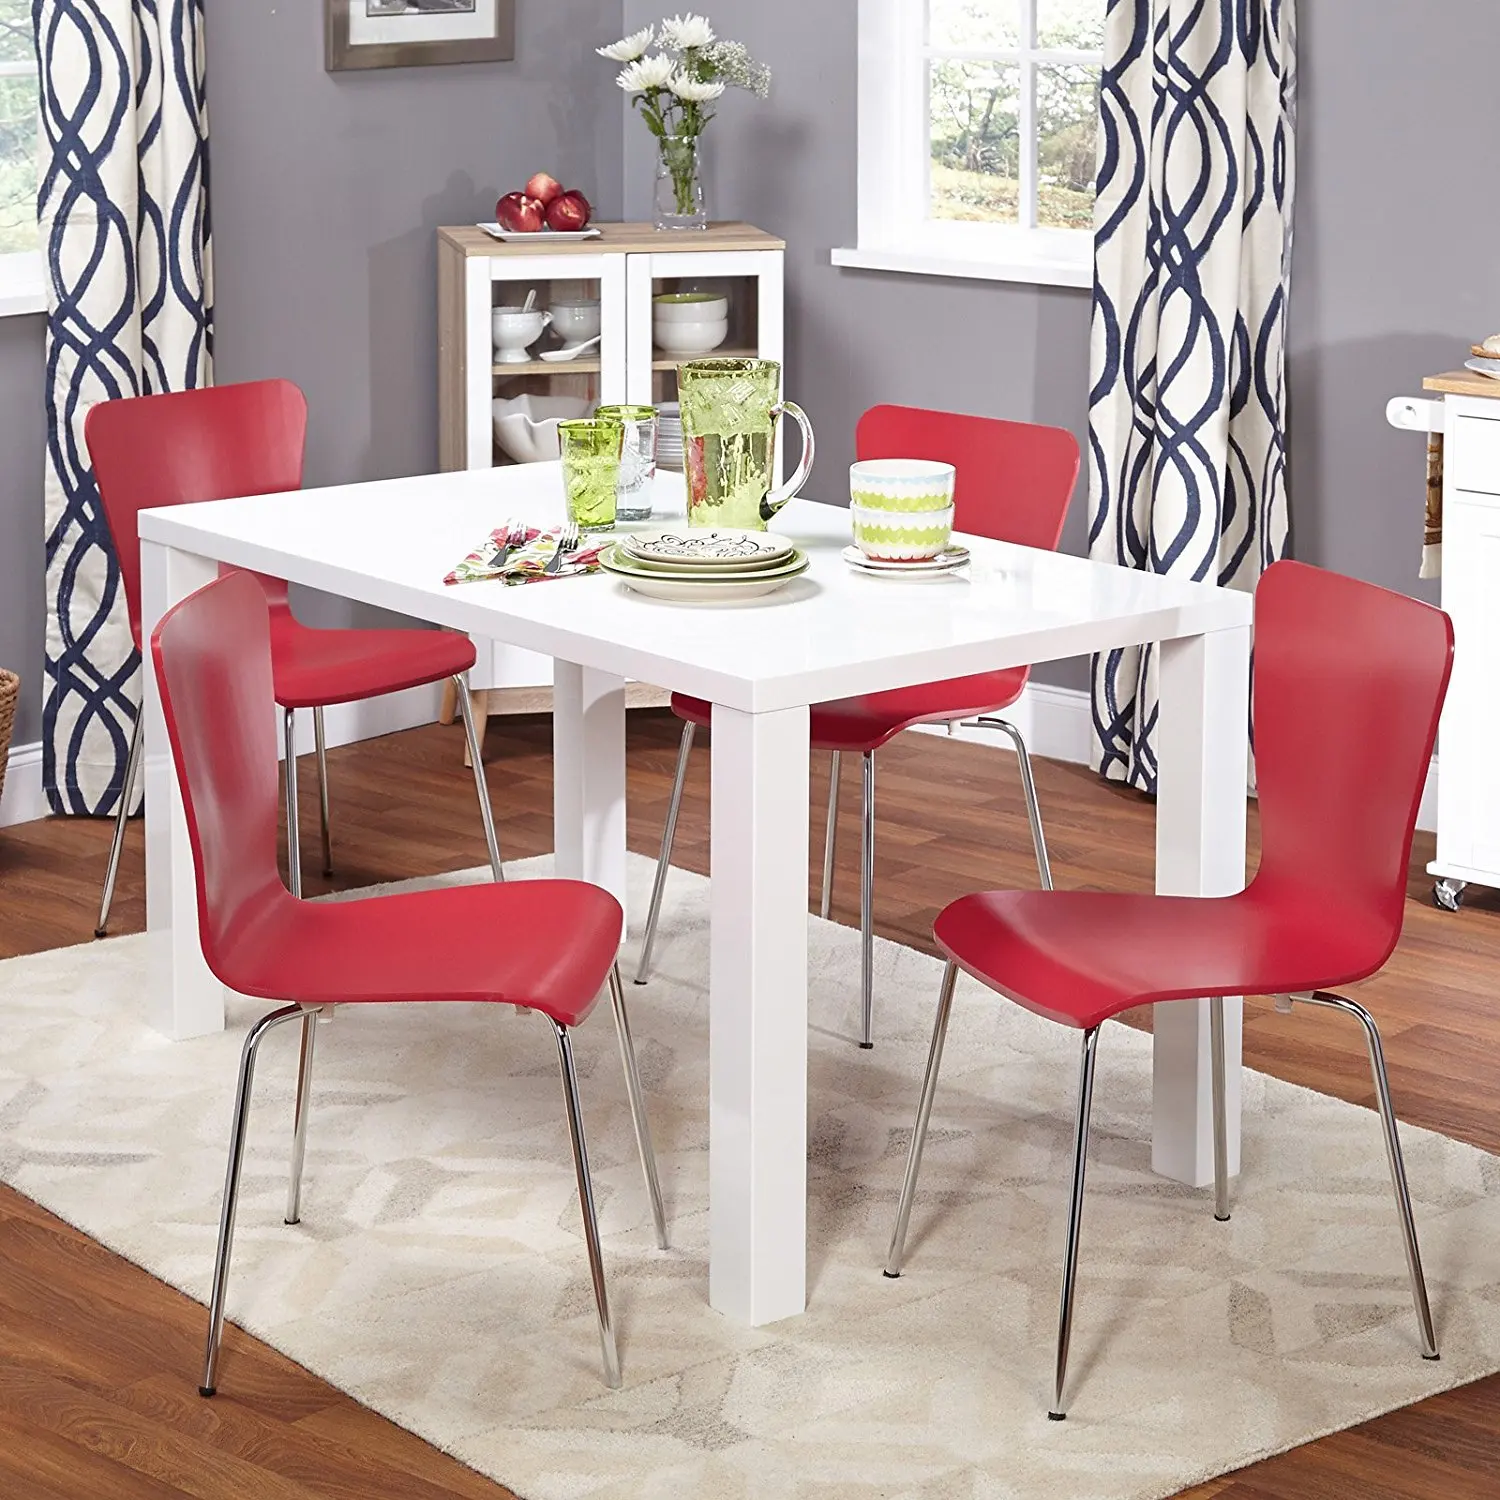 Cheap Red Modern Dining Chairs Find Red Modern Dining Chairs Deals On Line At Alibaba Com